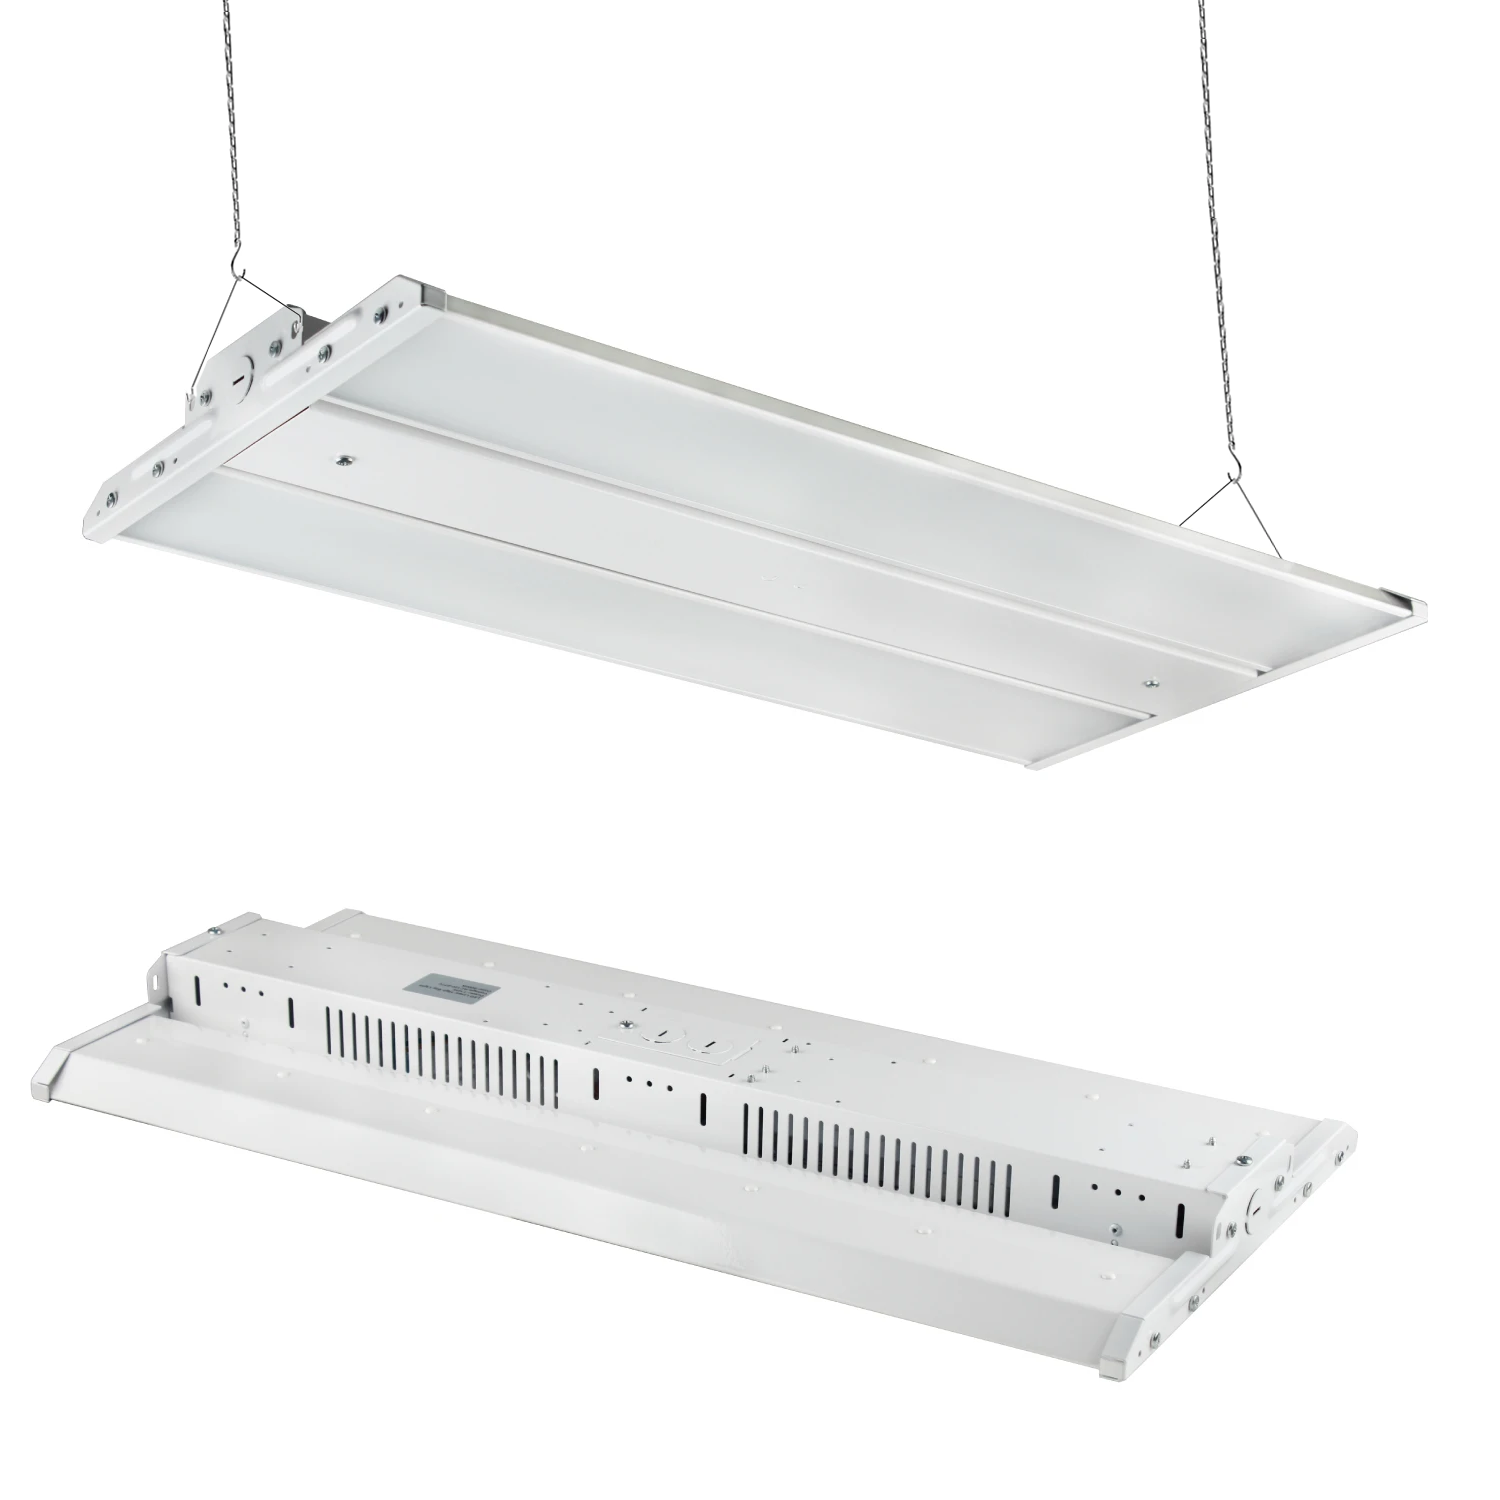 2FT LED Linear High Bay Light, 165W, 5700K, 22500LM, Linear Hanging Light For Industrial Factories, Commercial Factories, Retail Shop, Warehouse Lighting